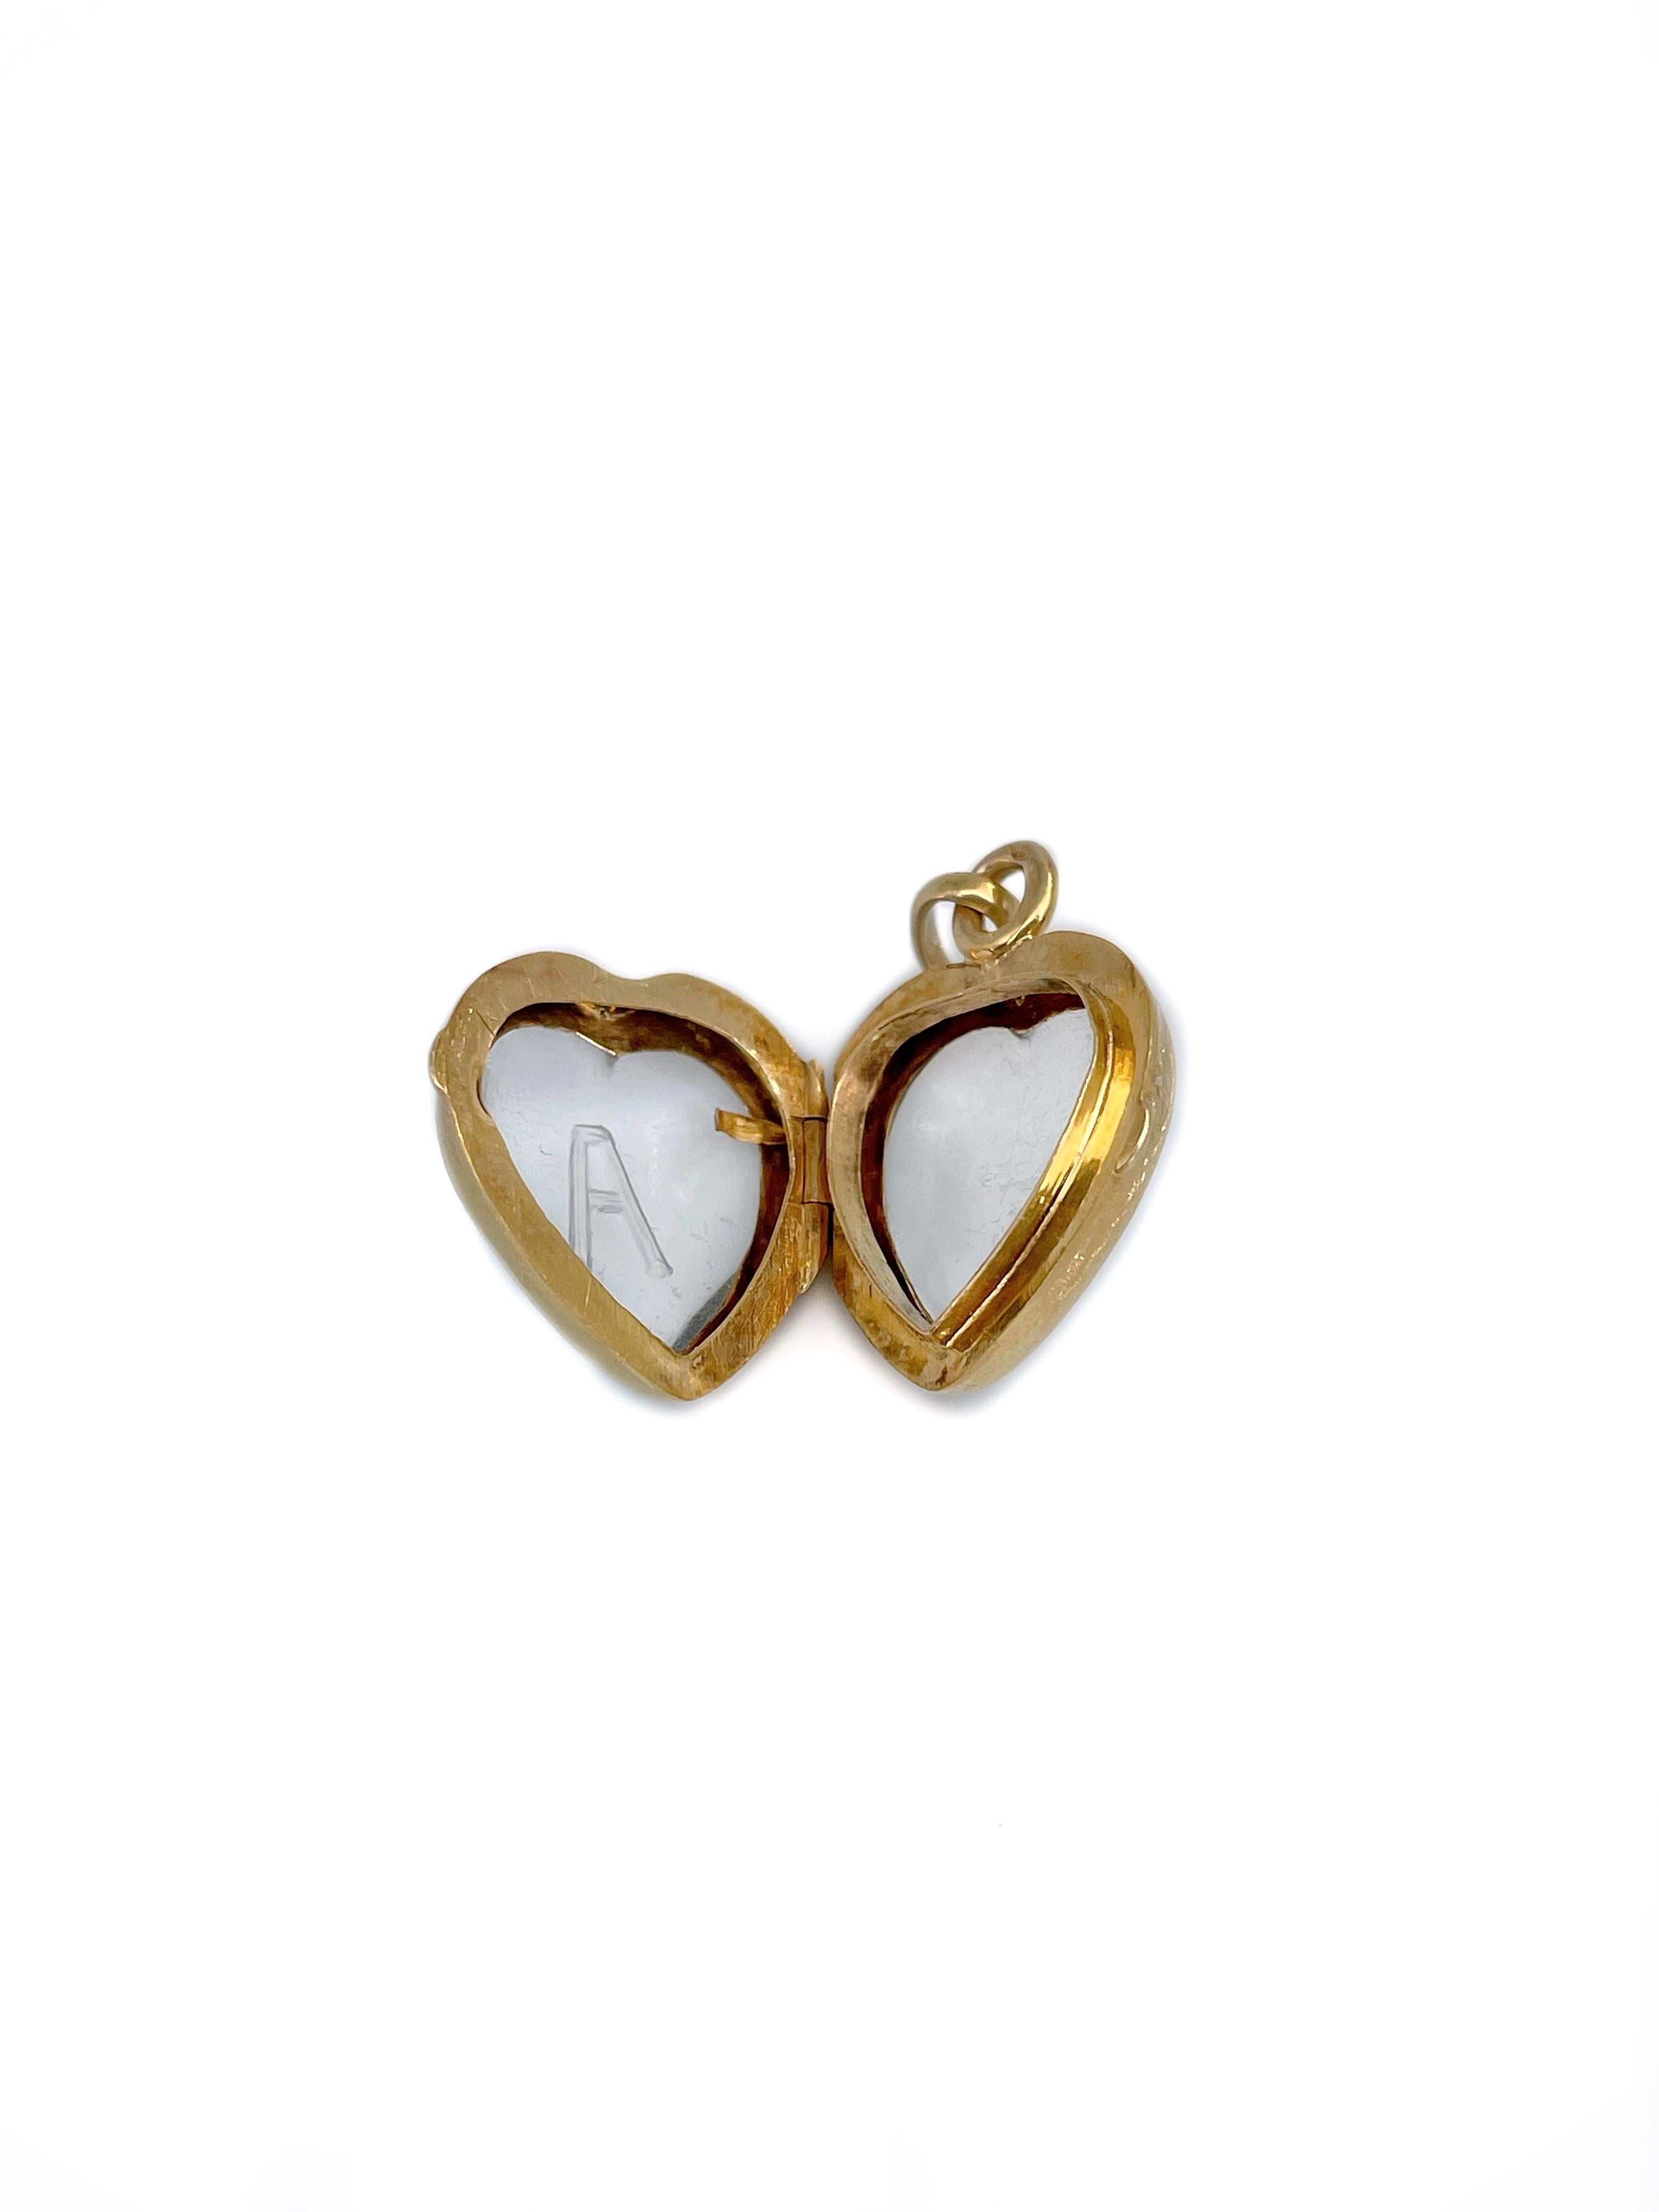 This is a delicate heart shape transparent locket pendant crafted in 14K yellow gold. Circa 1880. 

The piece is made of a rock crystal. Letter A is carved in the centre. 

The surface has scratches (can be seen in a video).

Weight: 3.38g
Size: